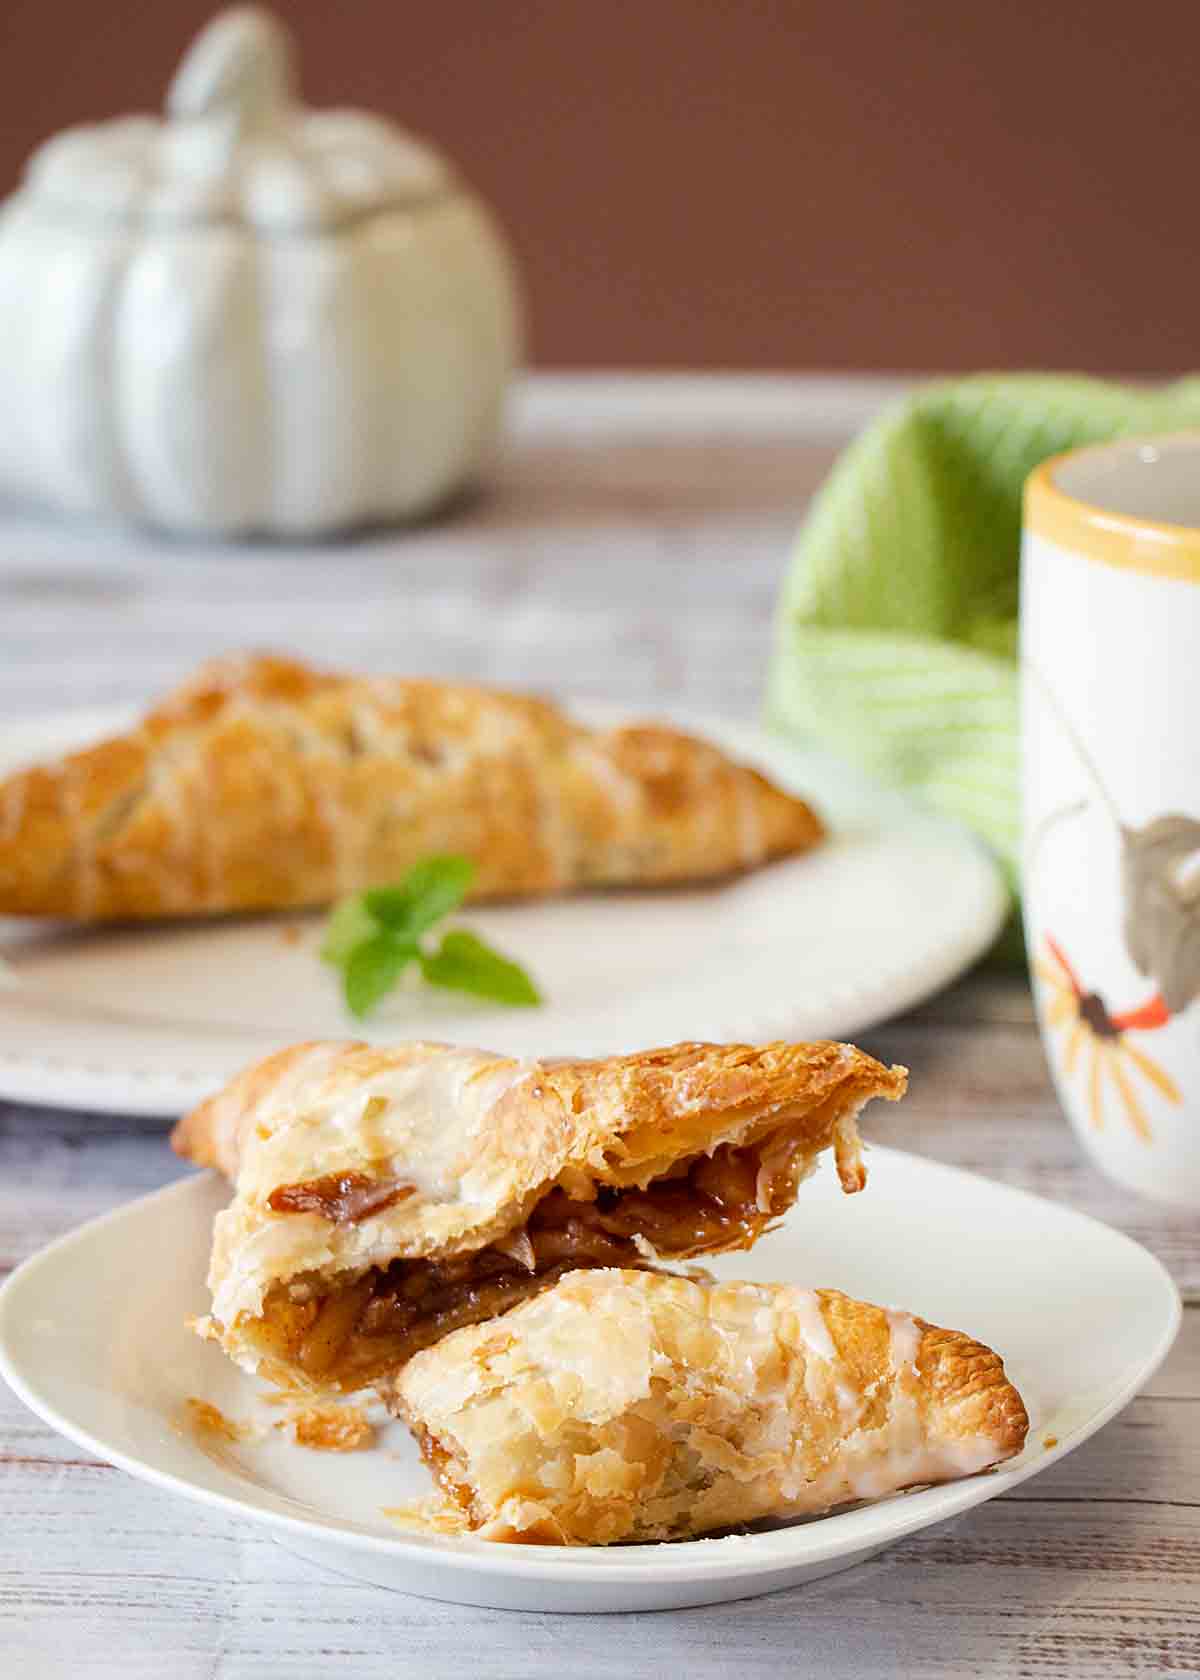 With flakey puff pastry & sweet apple filling, an apple turnover is a classic fall dessert, snack or breakfast treat! And it's easy to make! 